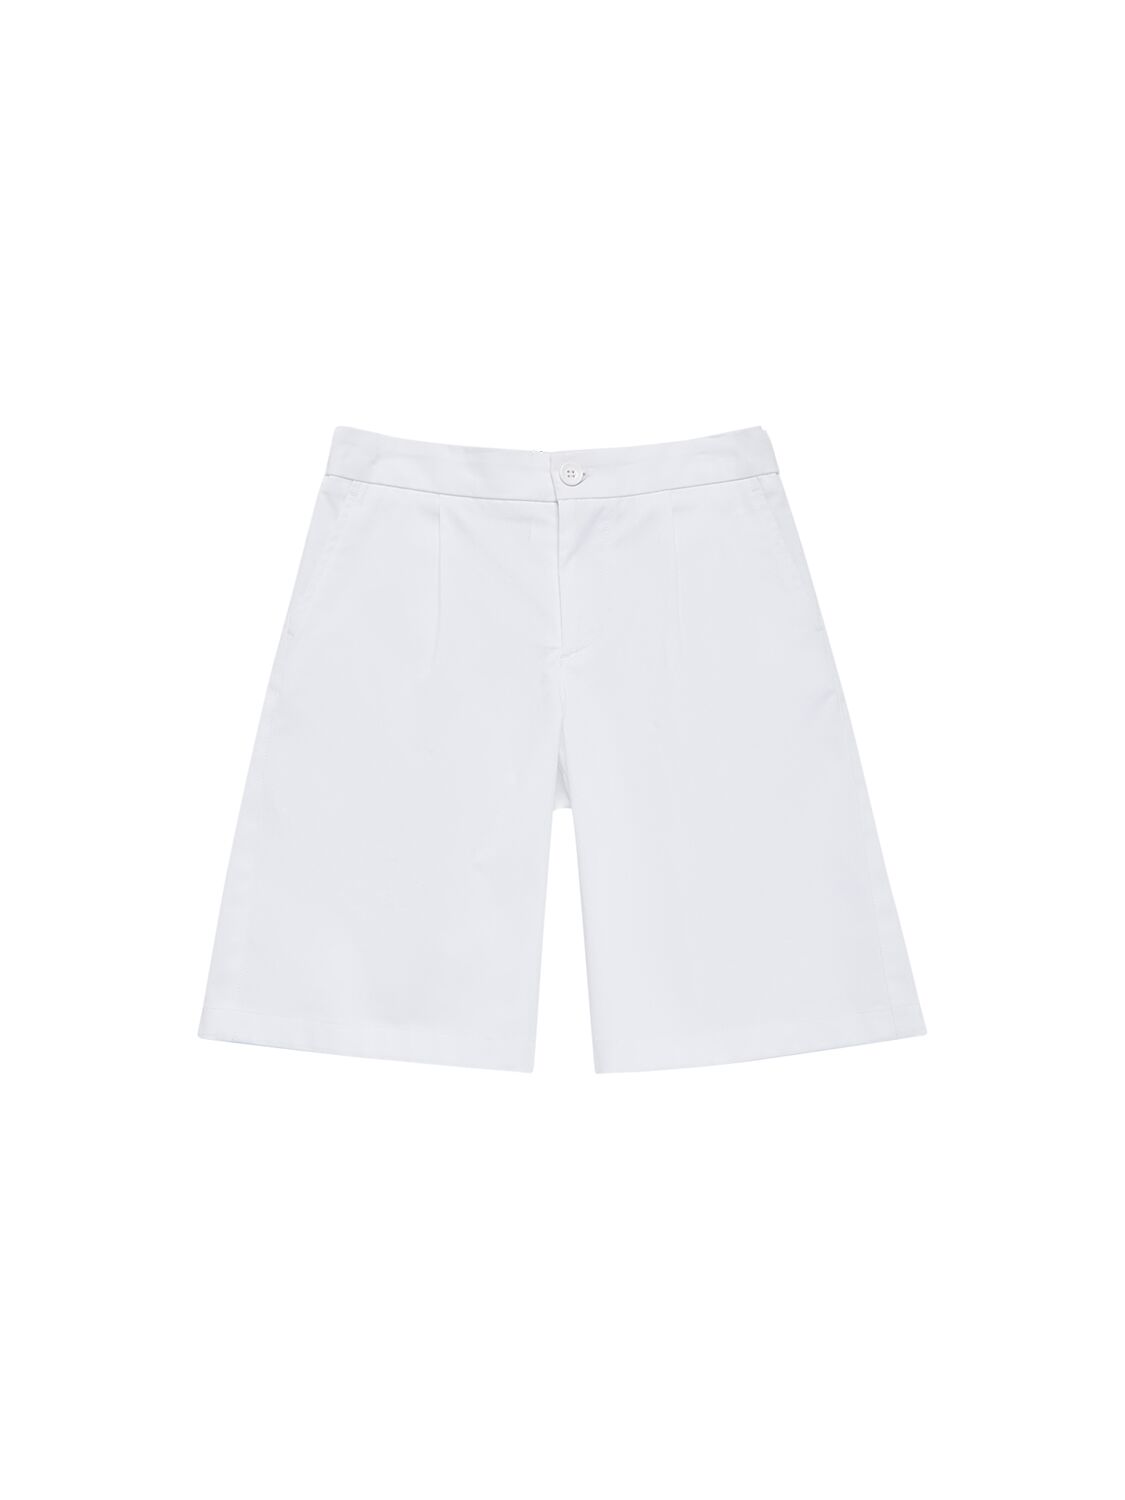 Image of Logo Printed Stretch Cotton Shorts